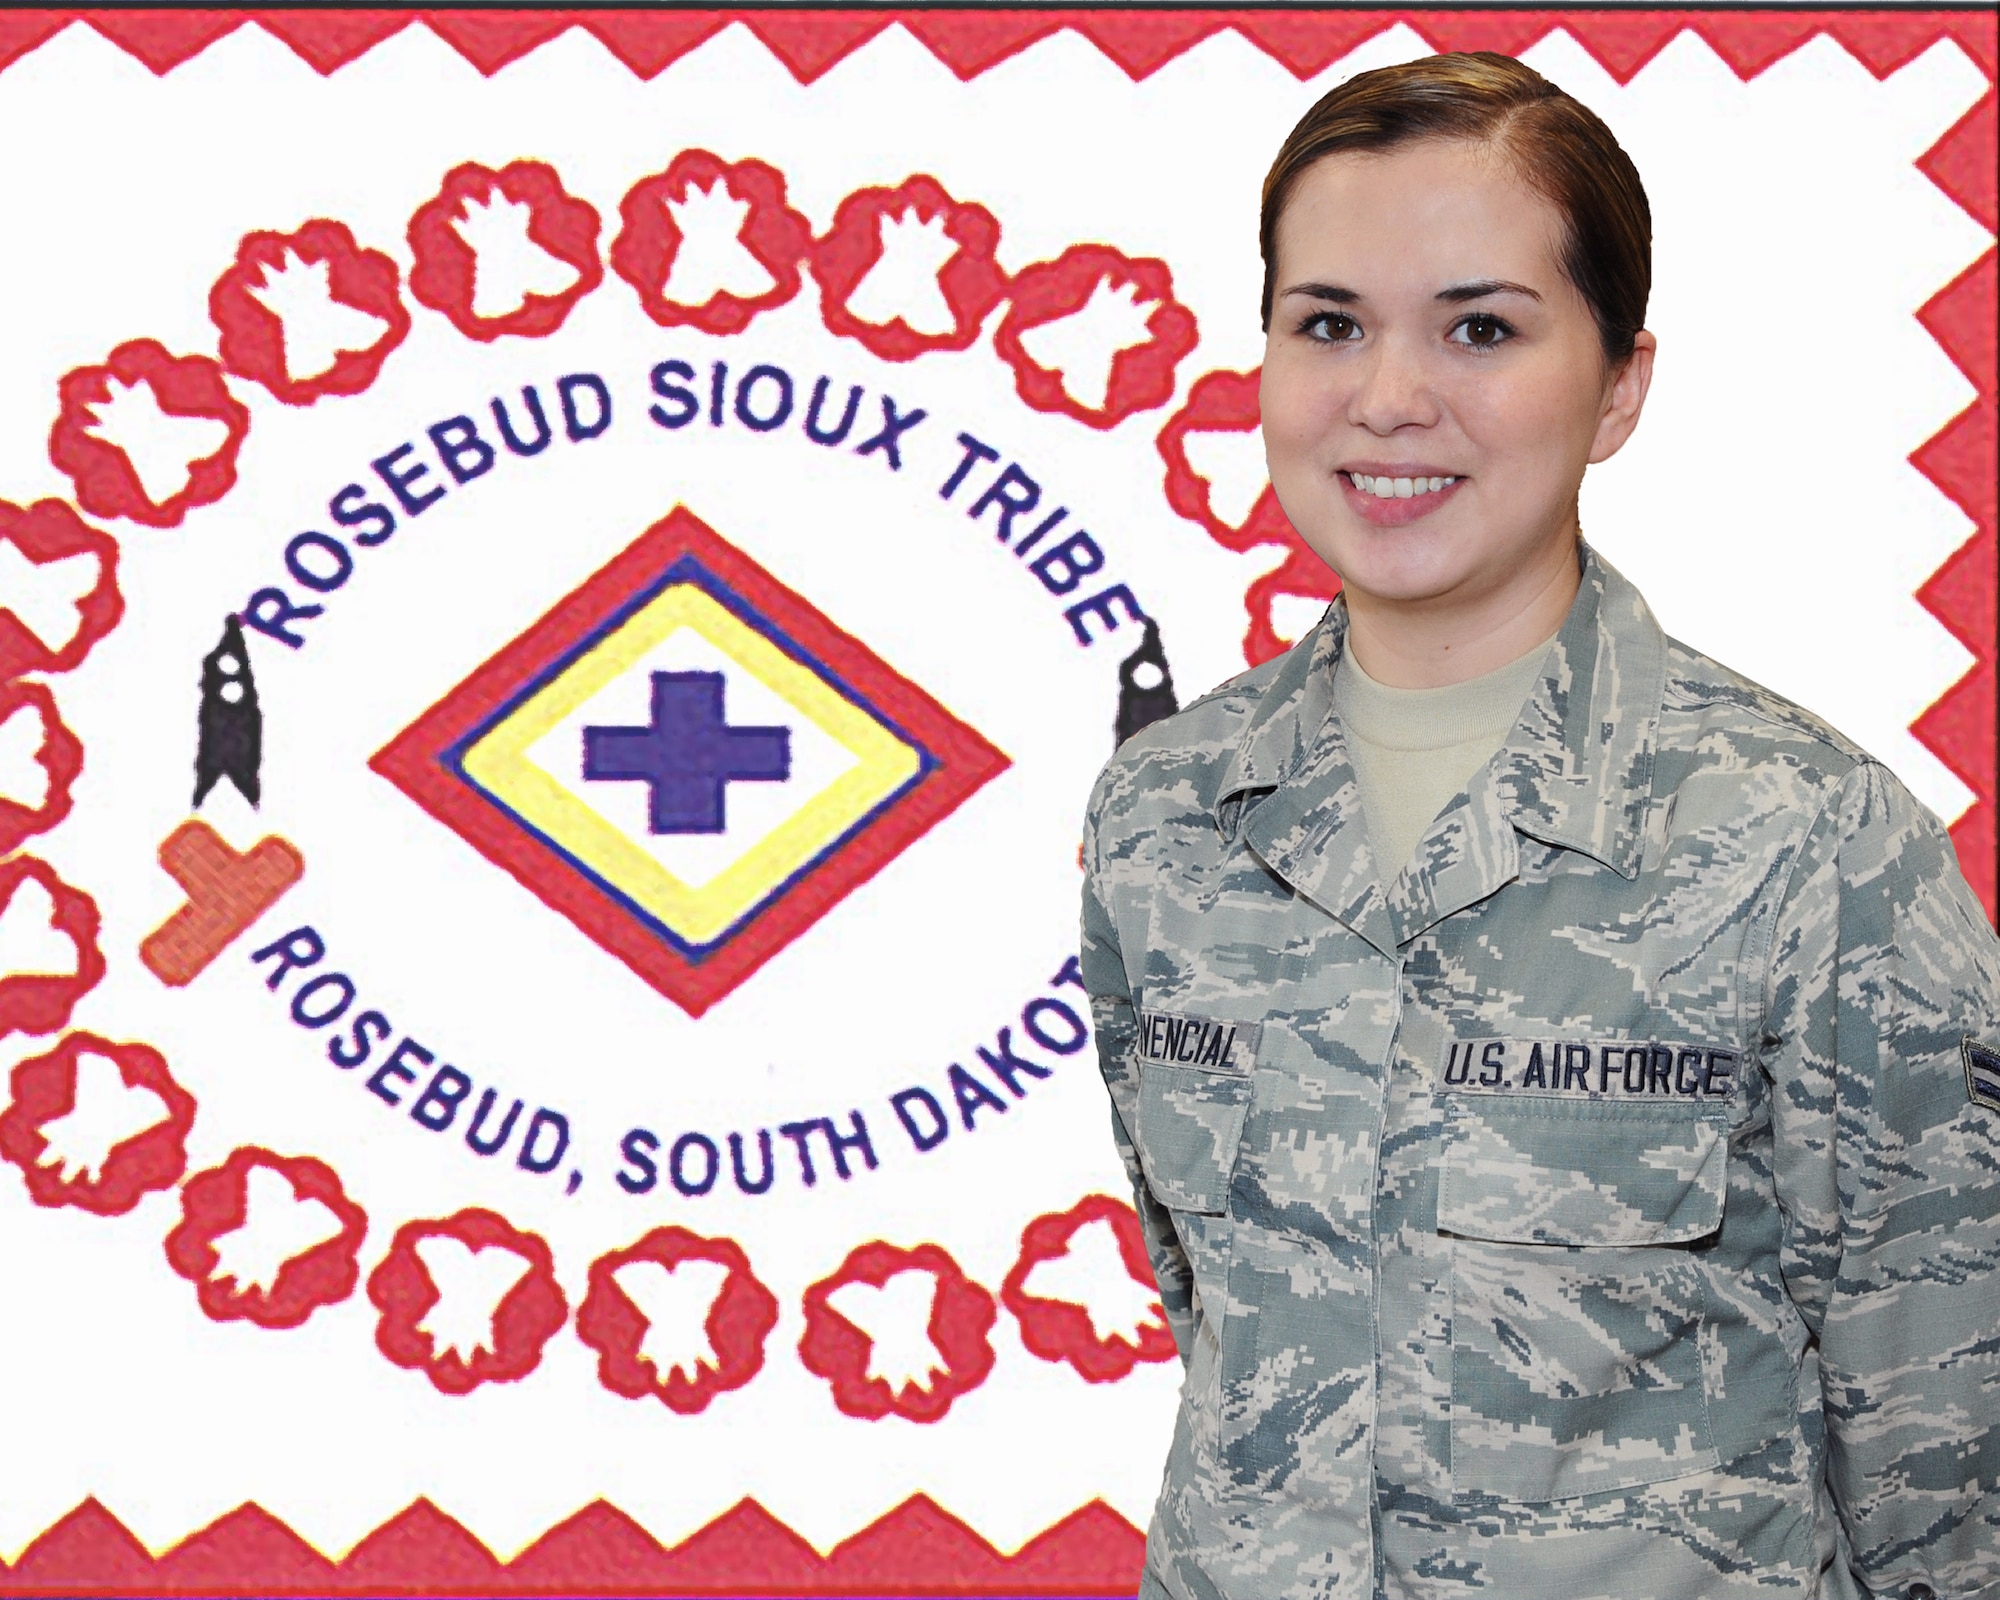 Airman 1st Class Cristi Provencial, a knowledge management and SharePoint administer with the 6th Communications Squadron at MacDill Air Force Base, Fla., is shown in front of the Rosebud Sioux Tribe flag. Provencial grew up on the Rosebud Sioux Tribe Reservation located in Mission, S. D., and joined the U.S. Air Force in February 2014. (U.S. Air Force photo illustration by Senior Airman Danielle Quilla)